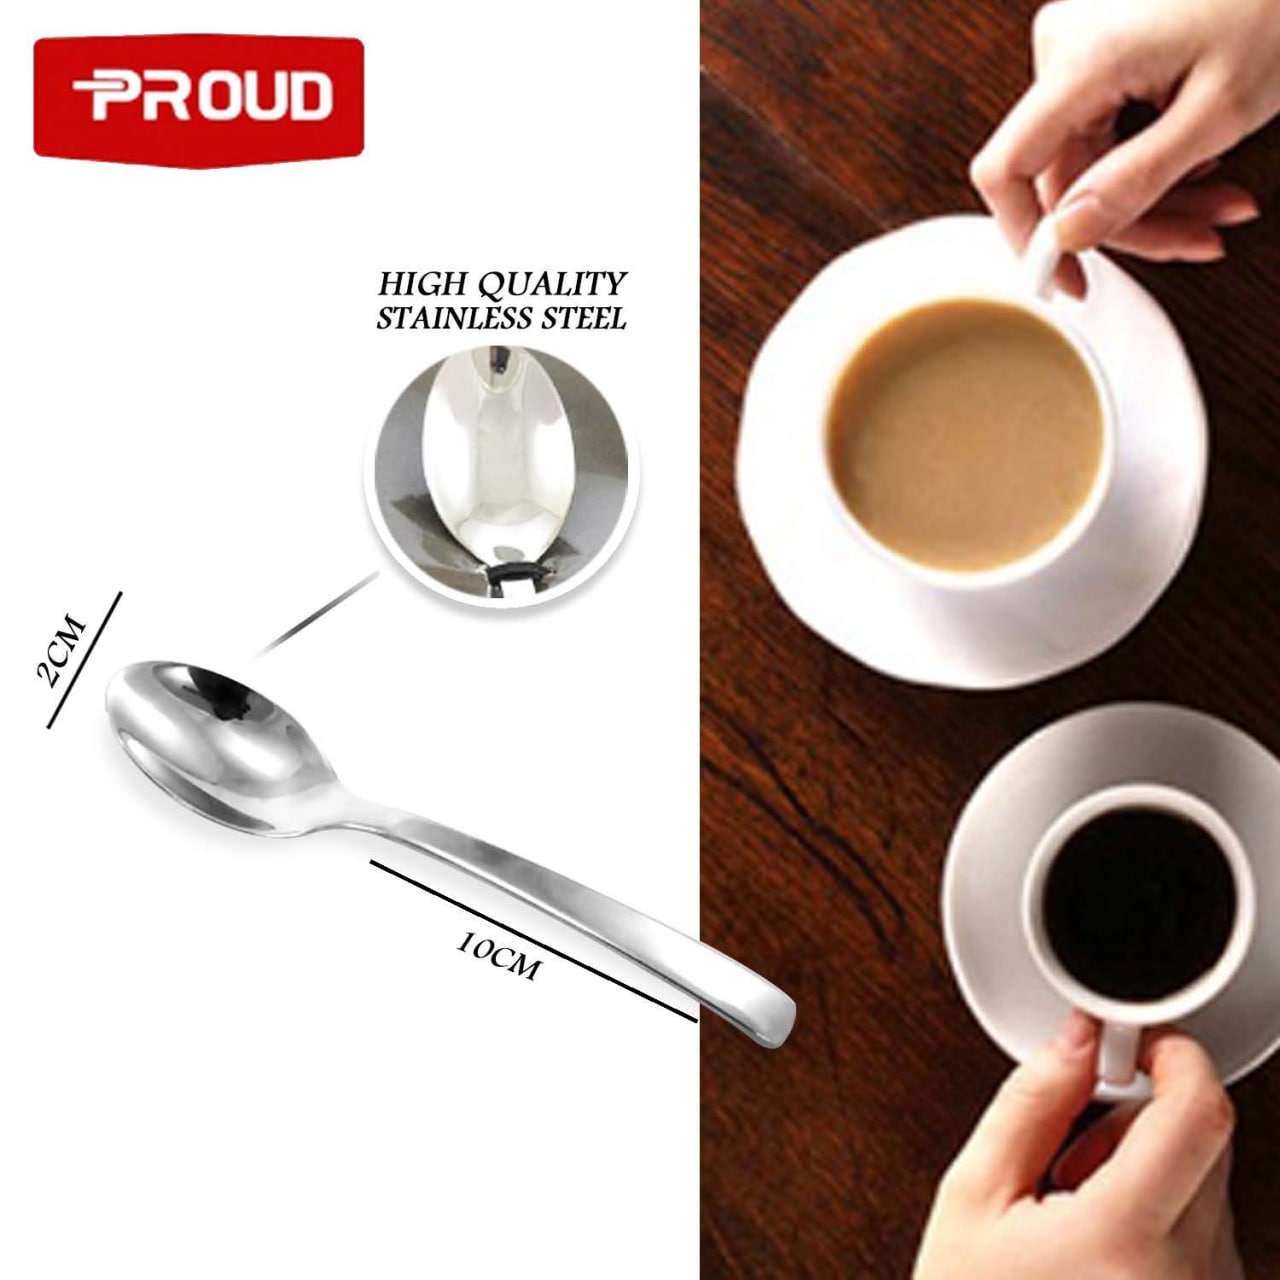 Proud Stainless Steel Small Spoon 10cm